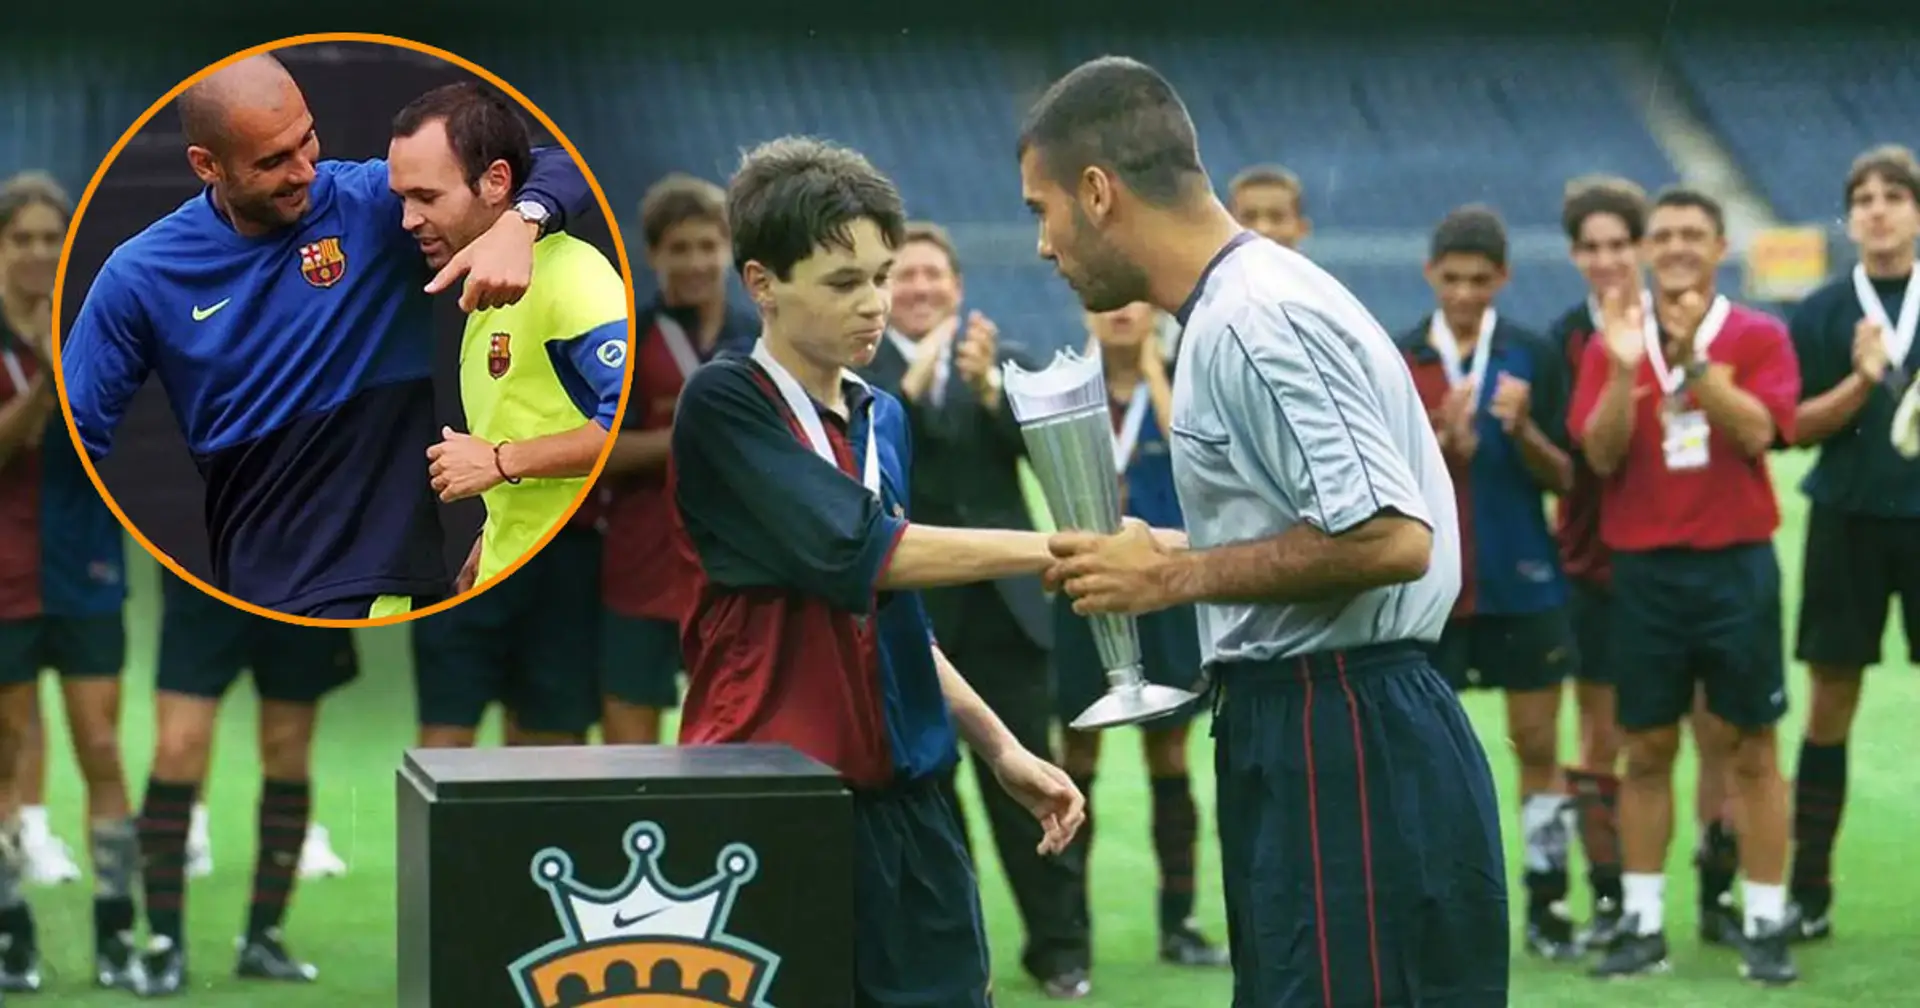 'He'll retire us both!': true story behind iconic photo of Pep Guardiola with teenager Iniesta